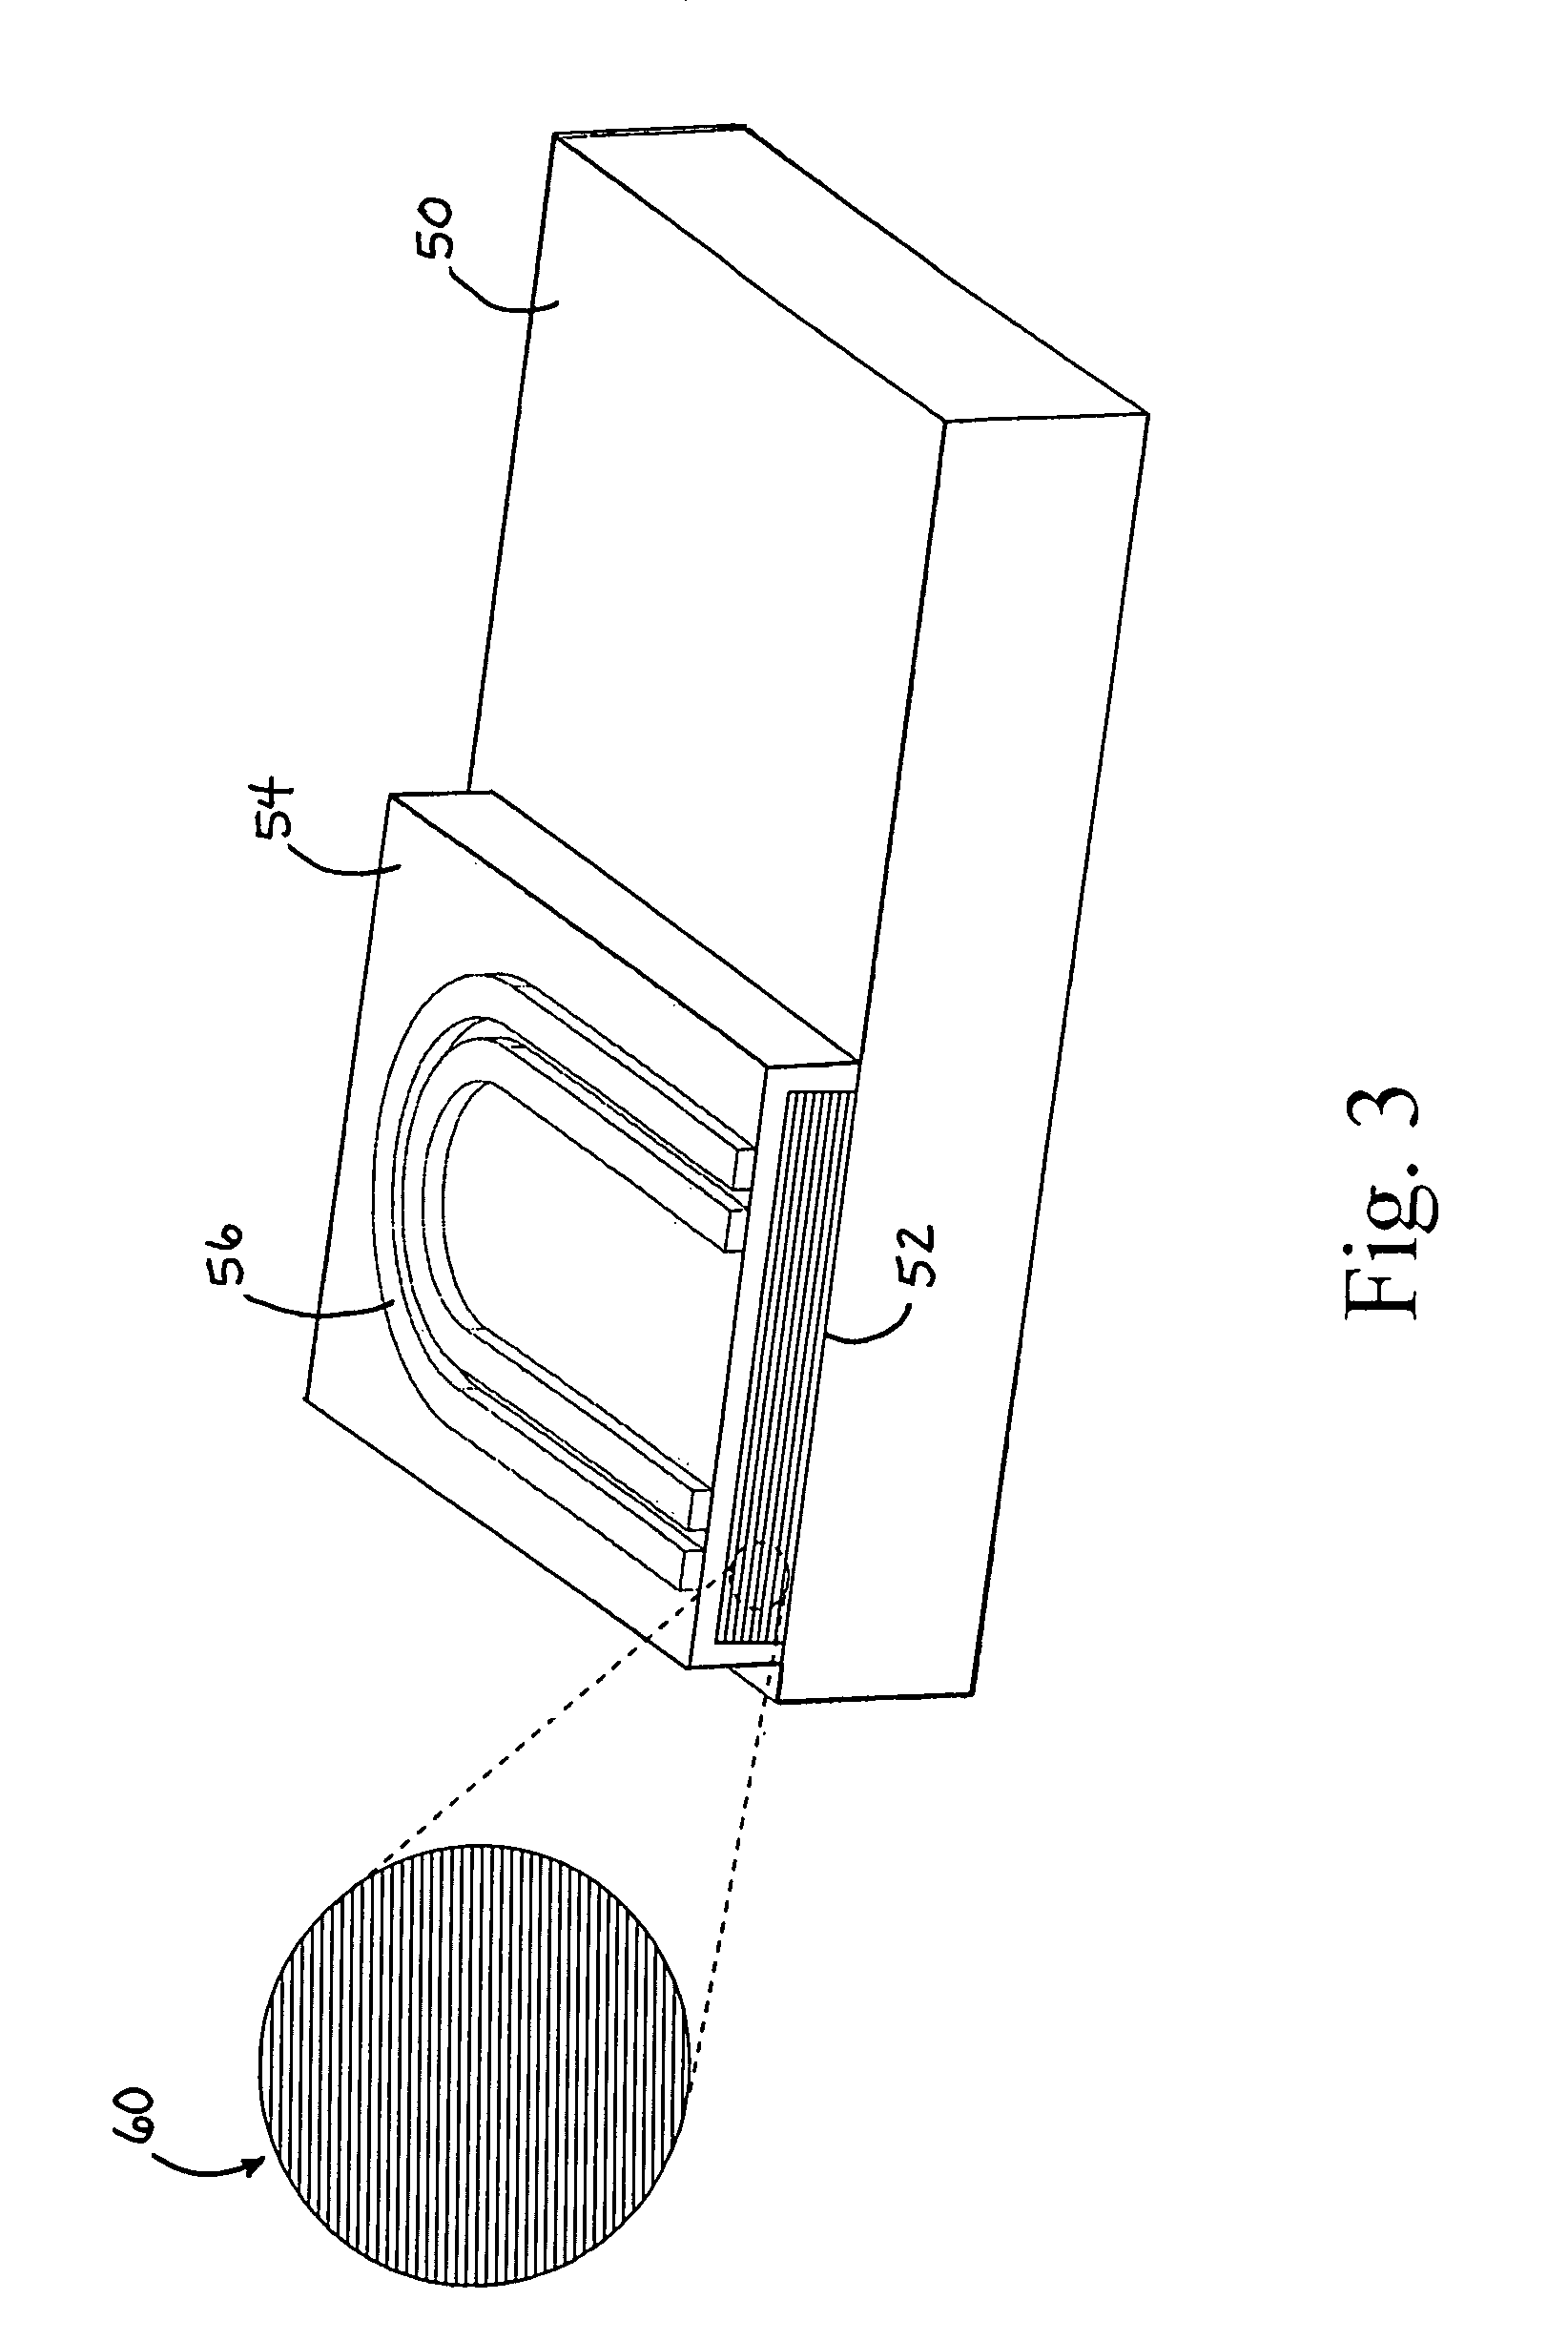 Systems and methods for flaw detection and monitoring at elevated temperatures with wireless communication using surface embedded, monolithically integrated, thin-film, magnetically actuated sensors, and methods for fabricating the sensors